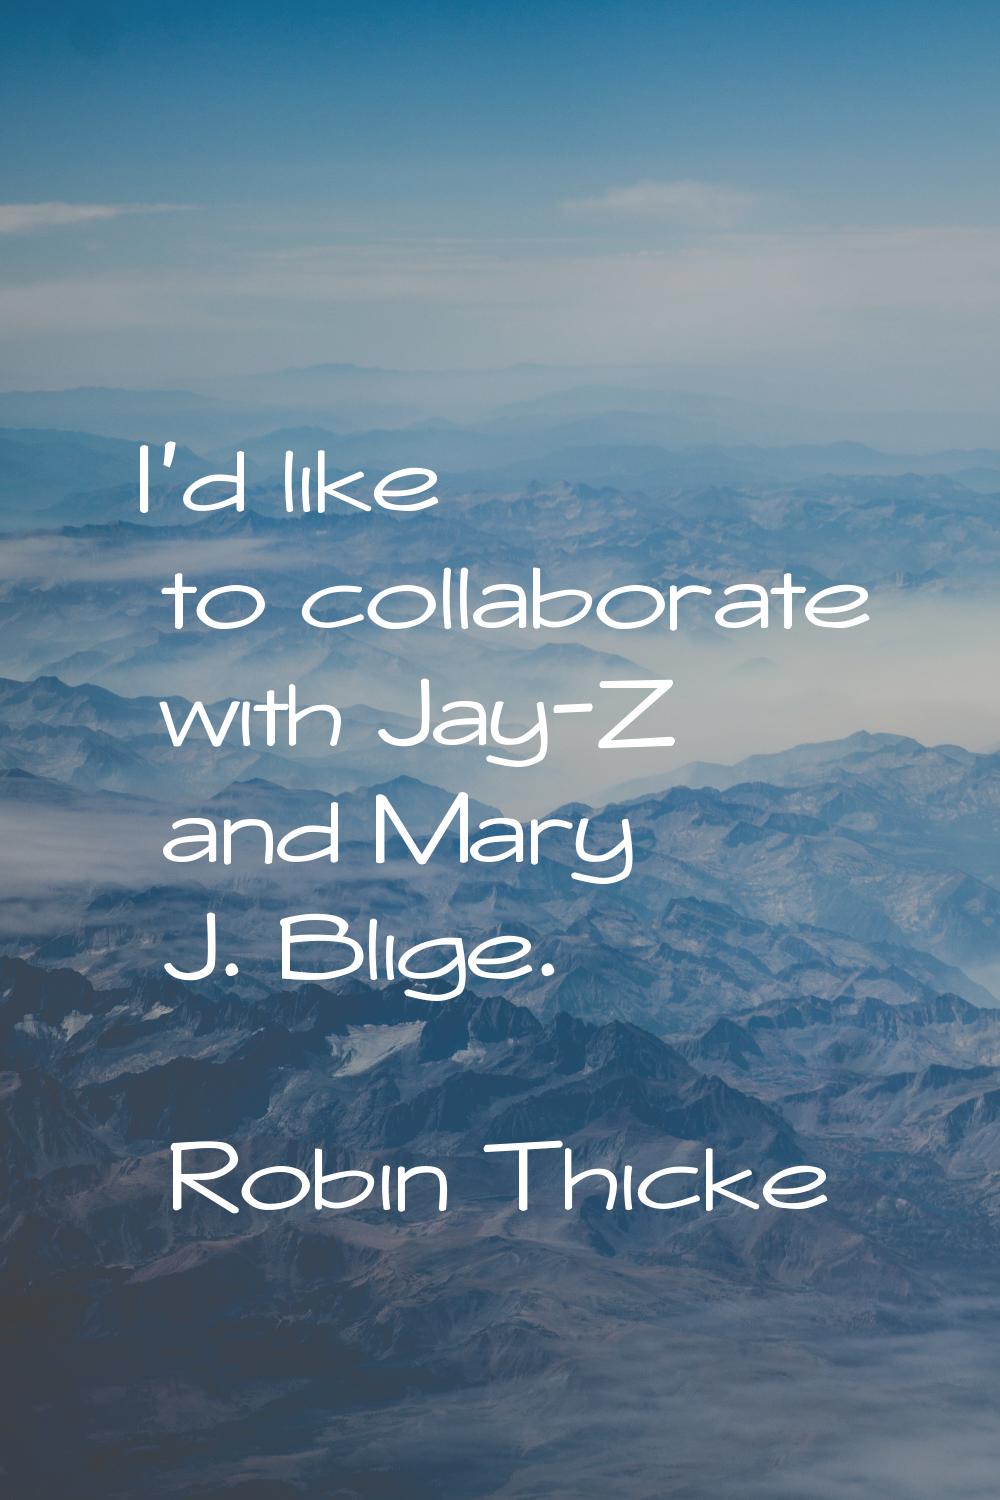 I'd like to collaborate with Jay-Z and Mary J. Blige.